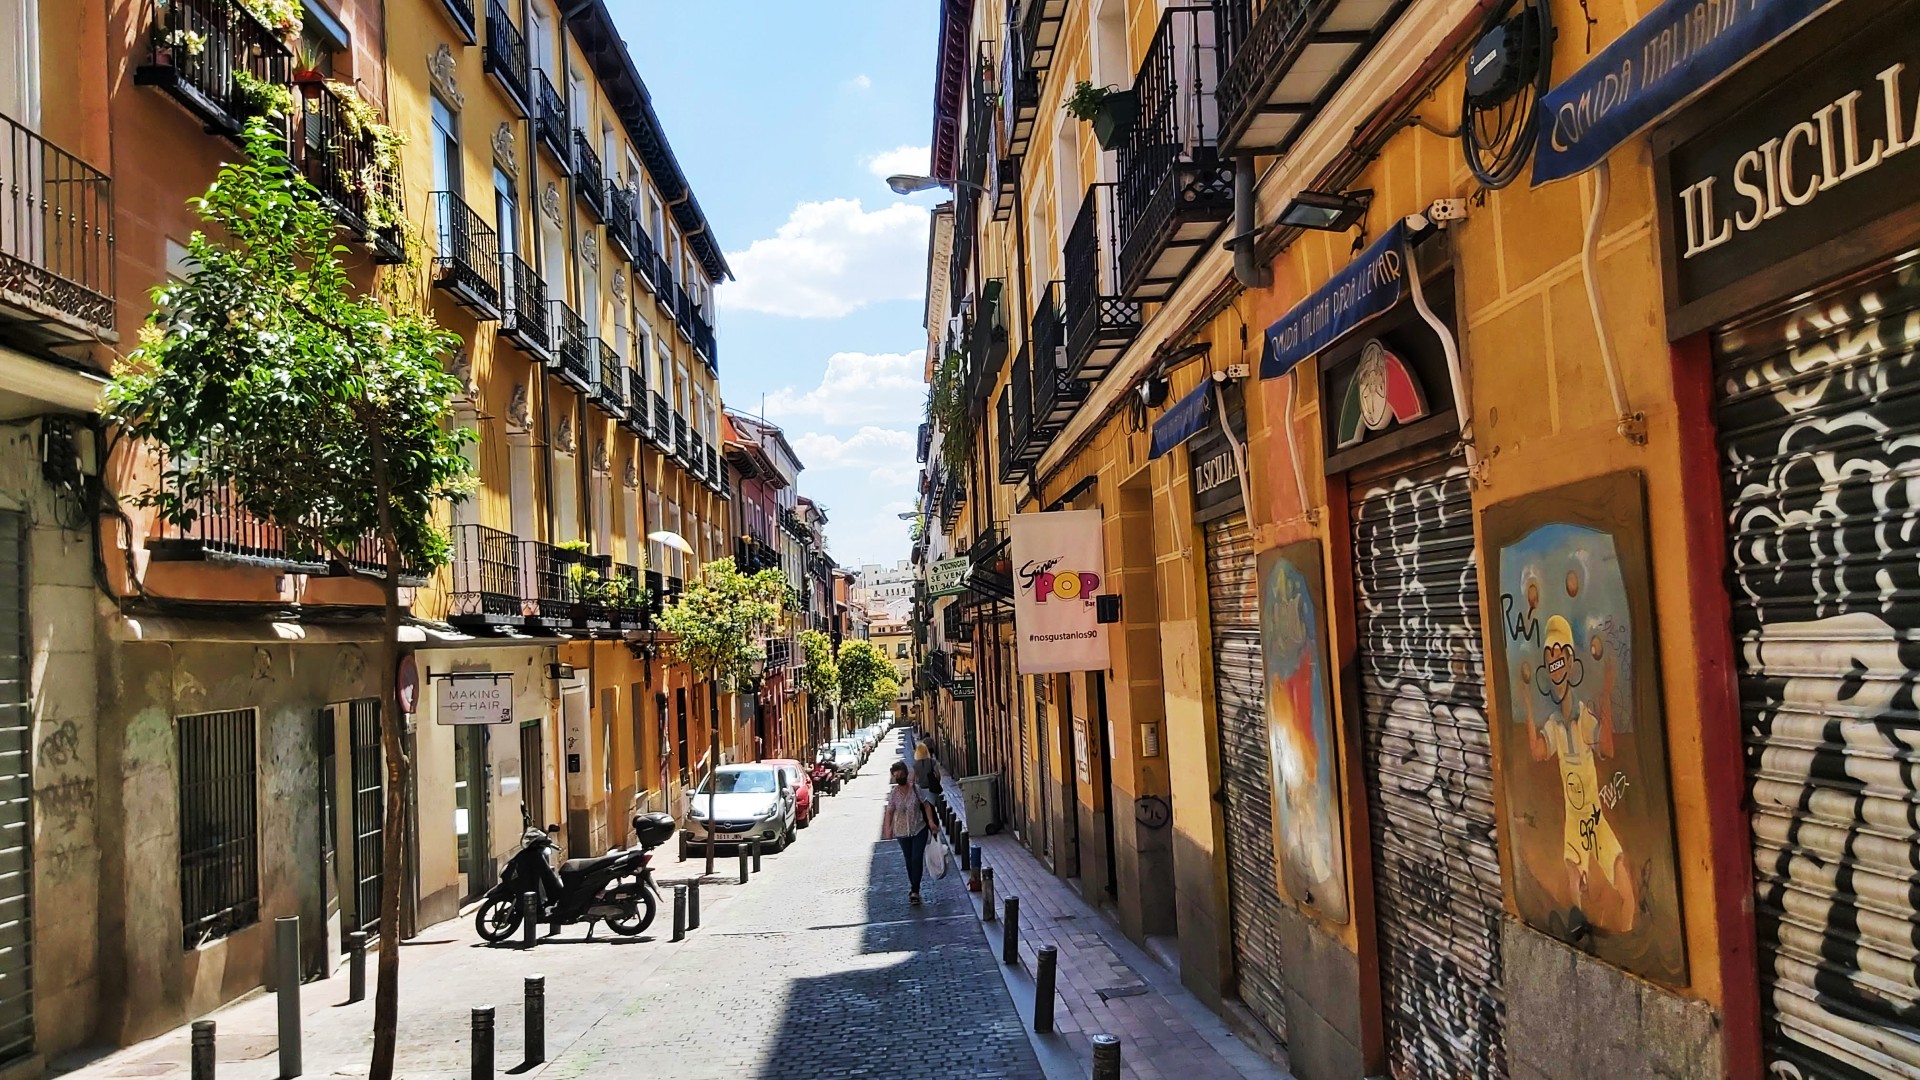 Occupying the northwestern end of Central Madrid, Malasaña has long being the city's alternative district and nightlife hotspot